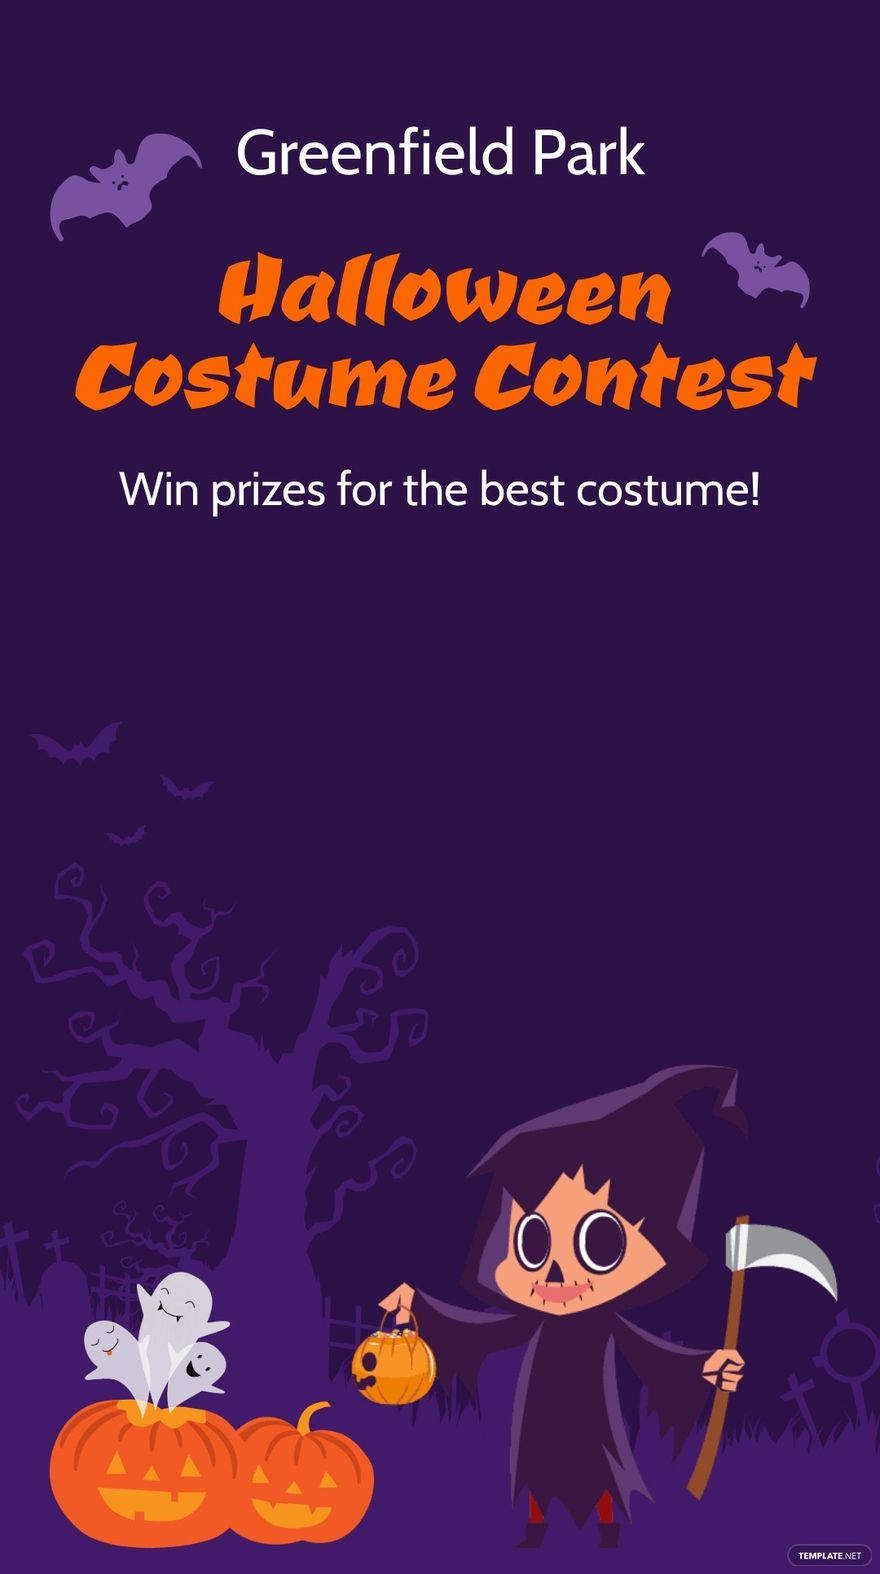 Free Halloween Costume Contest Snapchat Geofilter Template